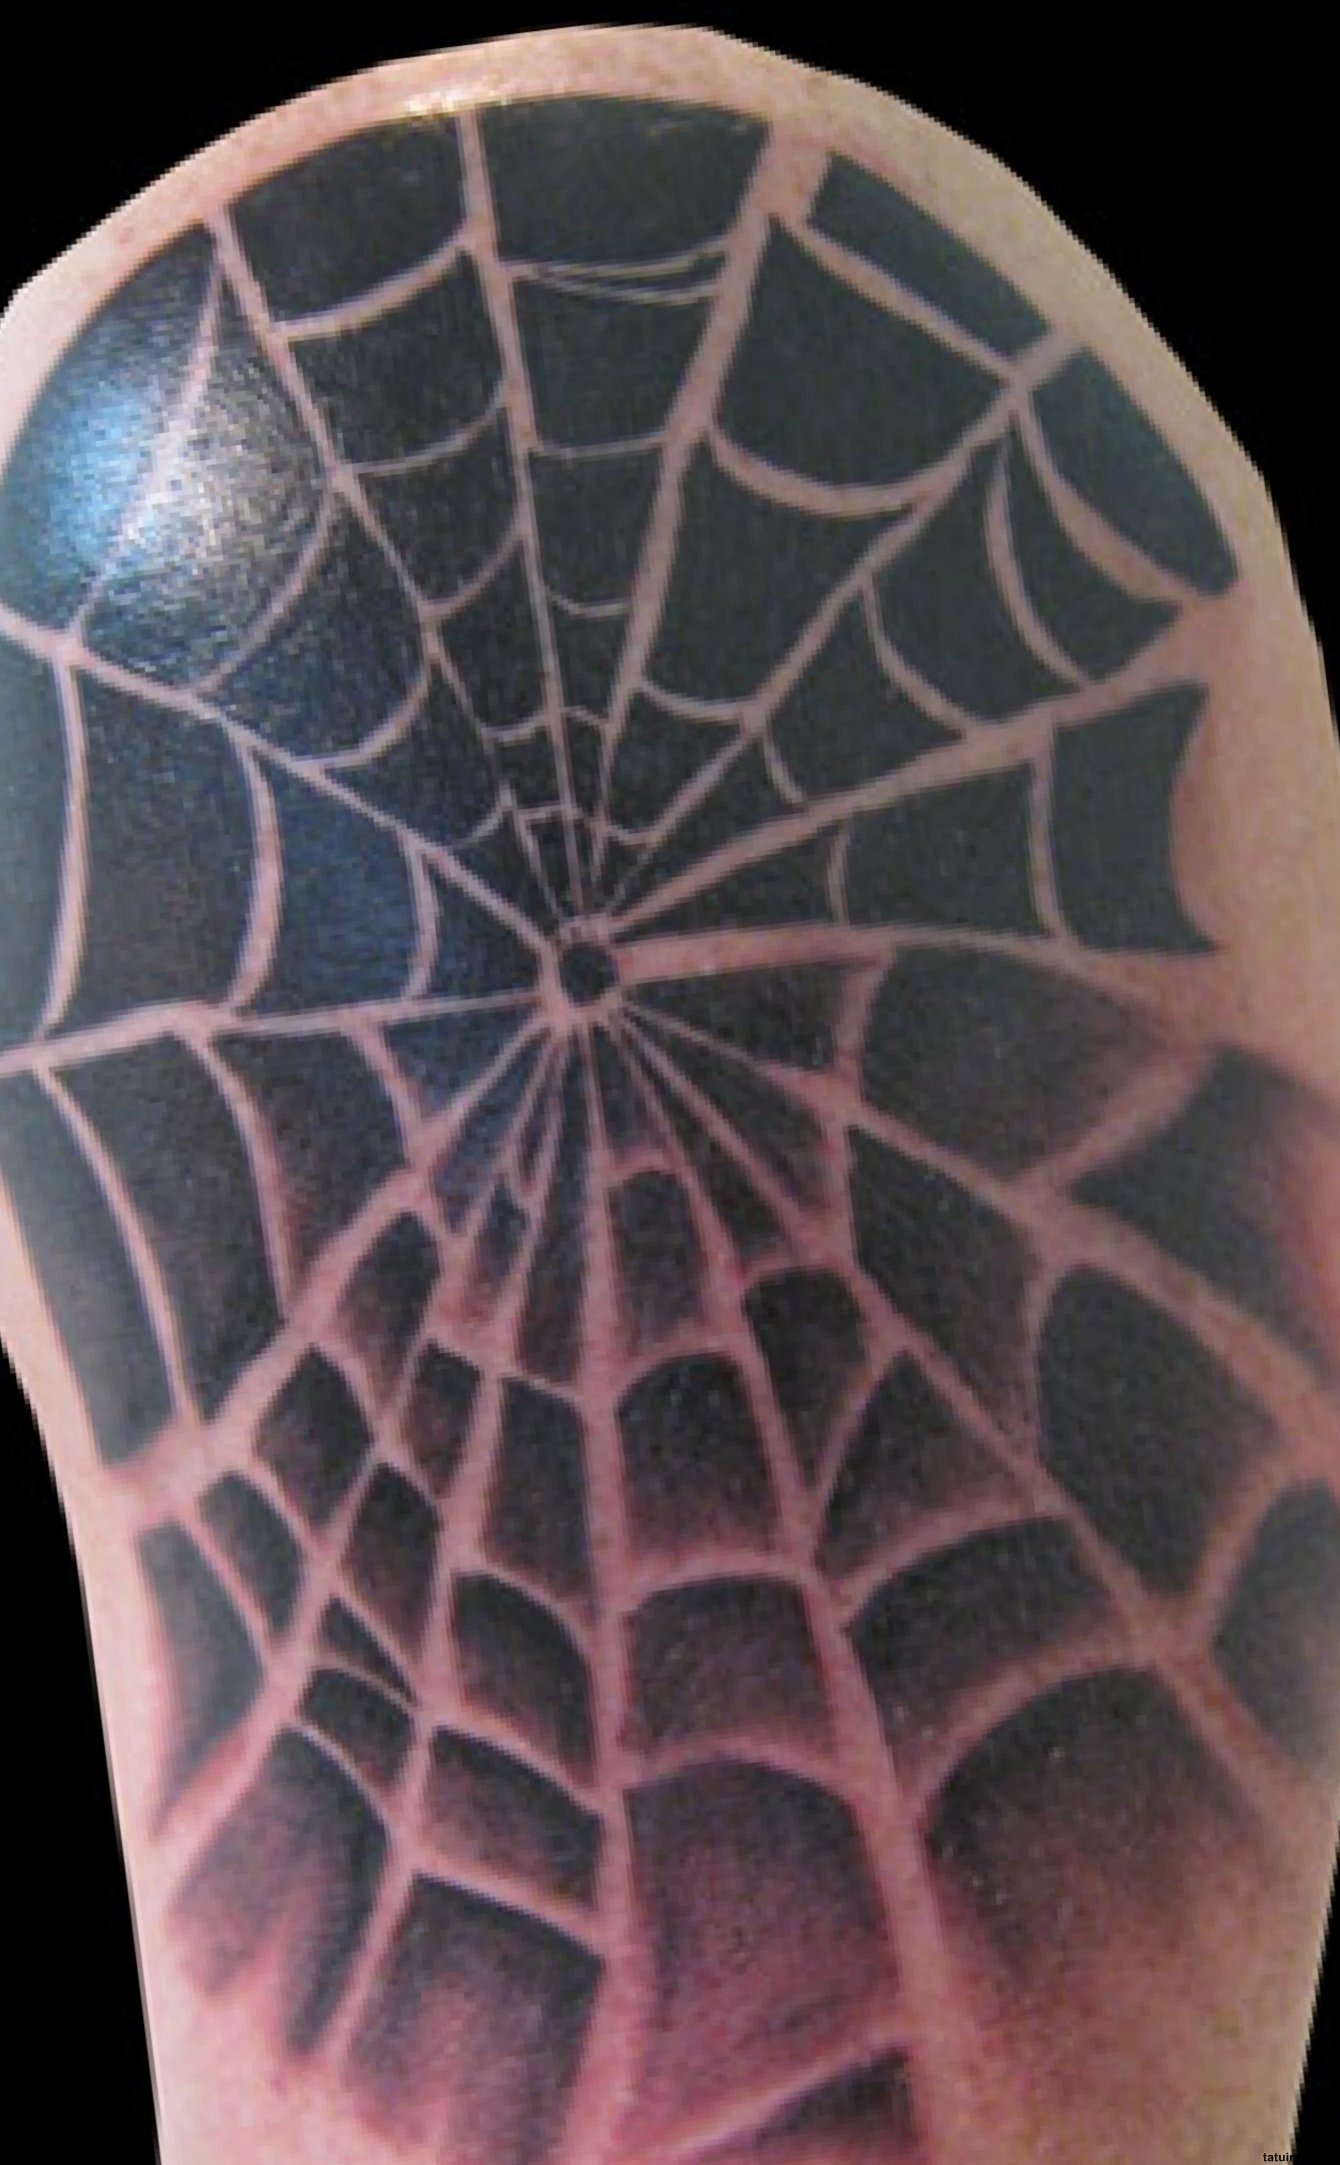 Spider Web Tattoos Designs, Ideas and Meaning | Tattoos For You